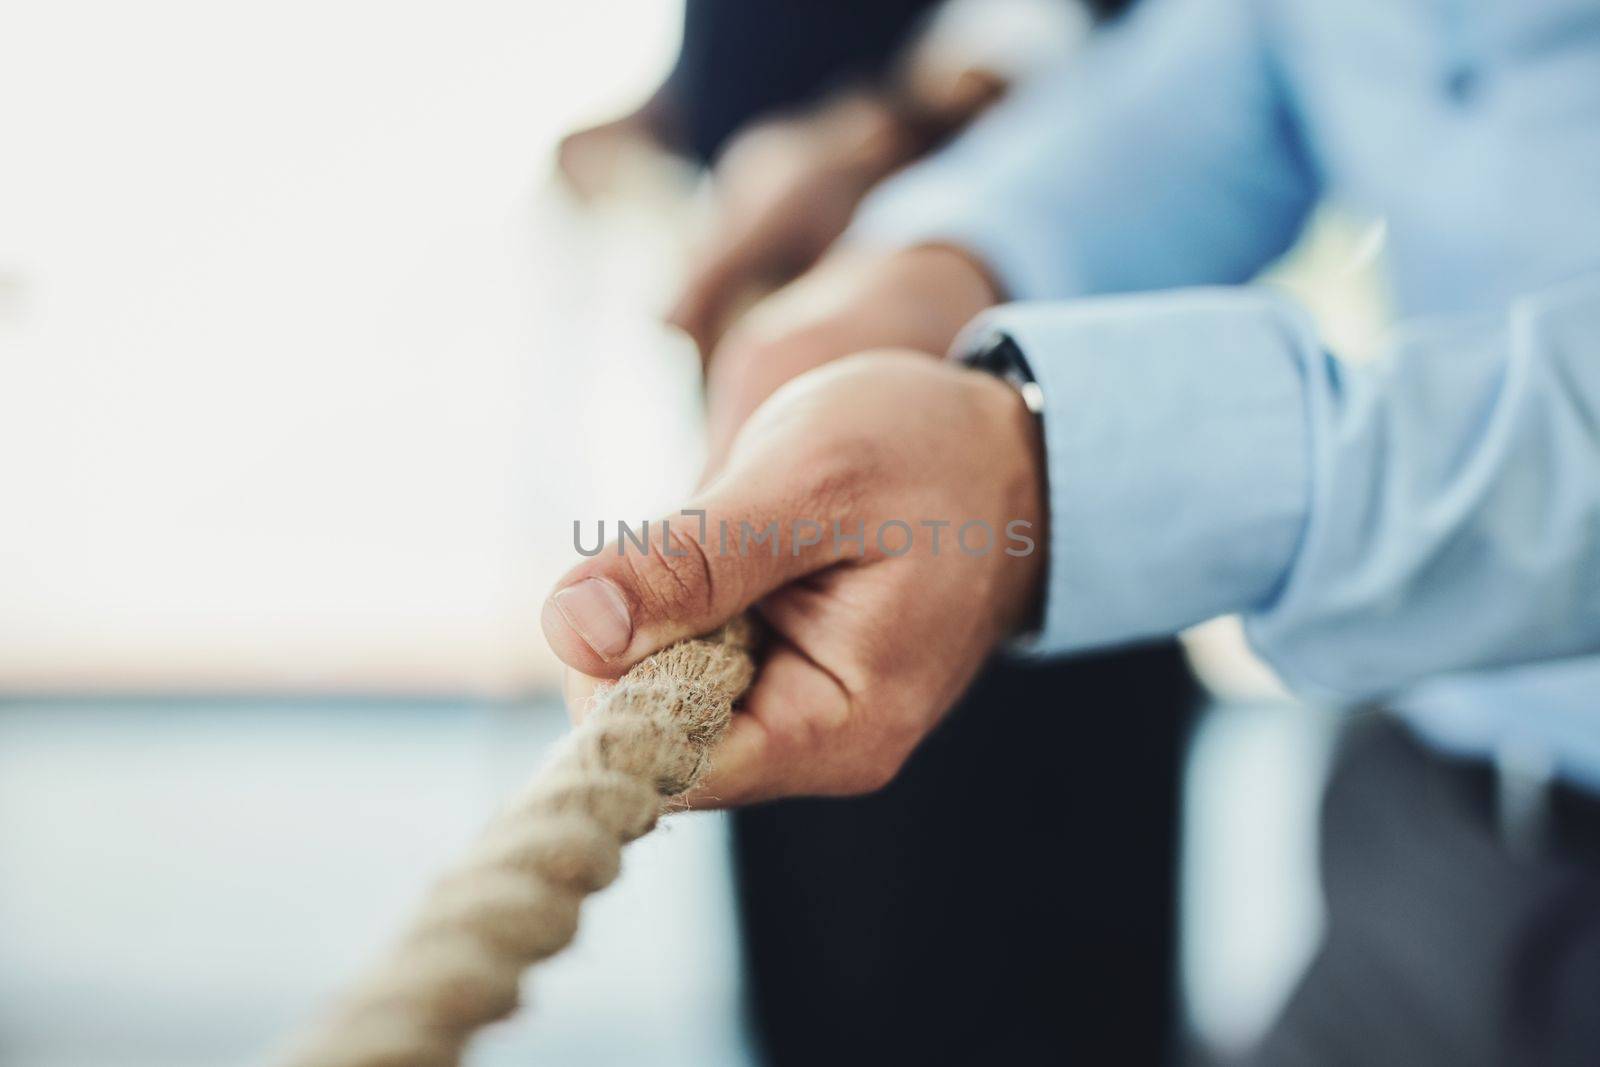 Grab a hold of your goals and keep pulling them closer. Closeup shot of unrecognizable businesspeople pulling on a rope